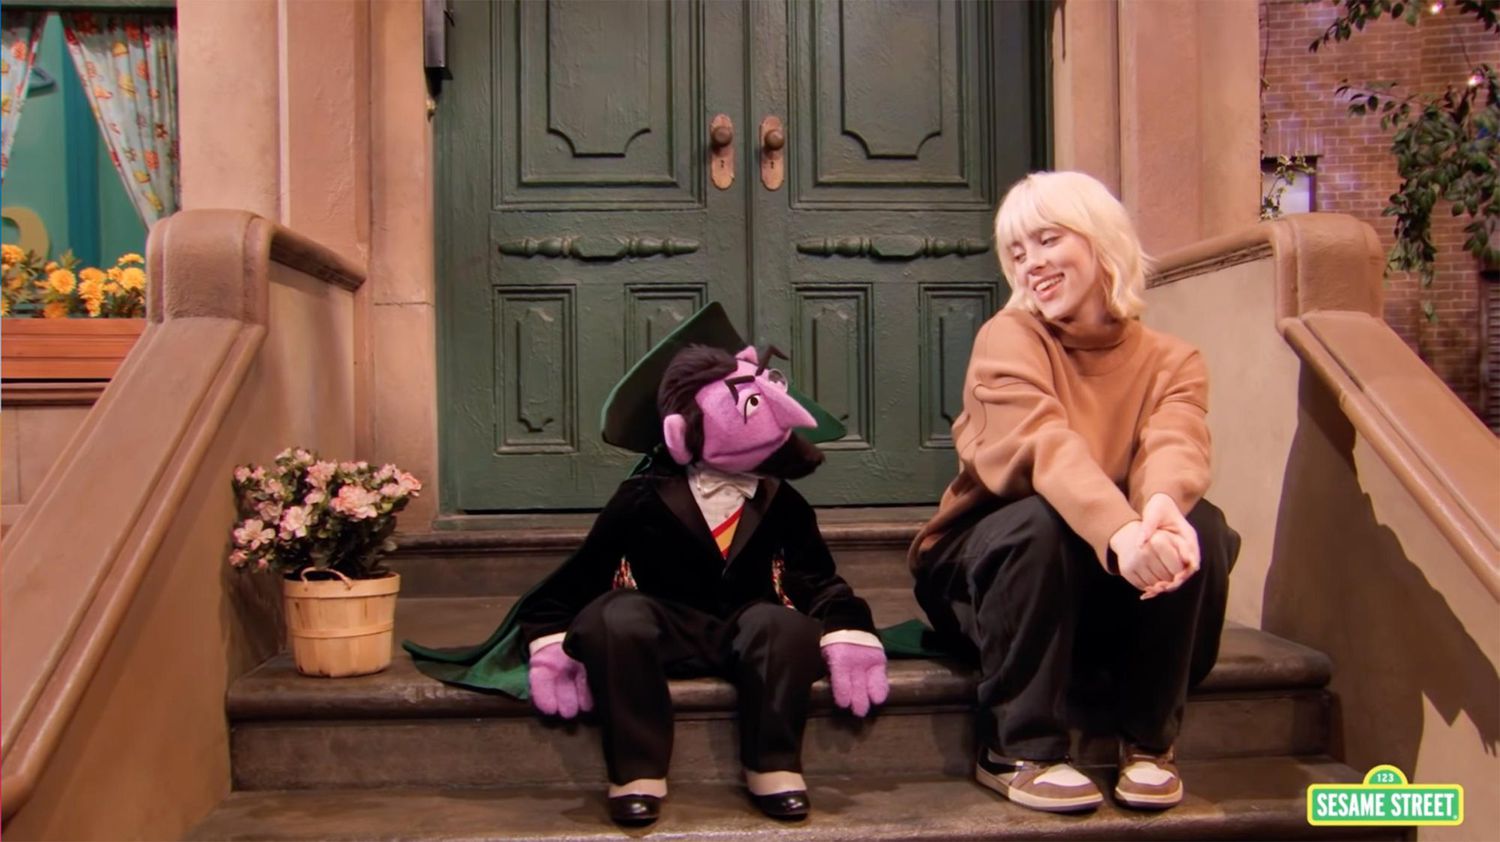 Billie Eilish duets with the Count in Sesame Street premiere 